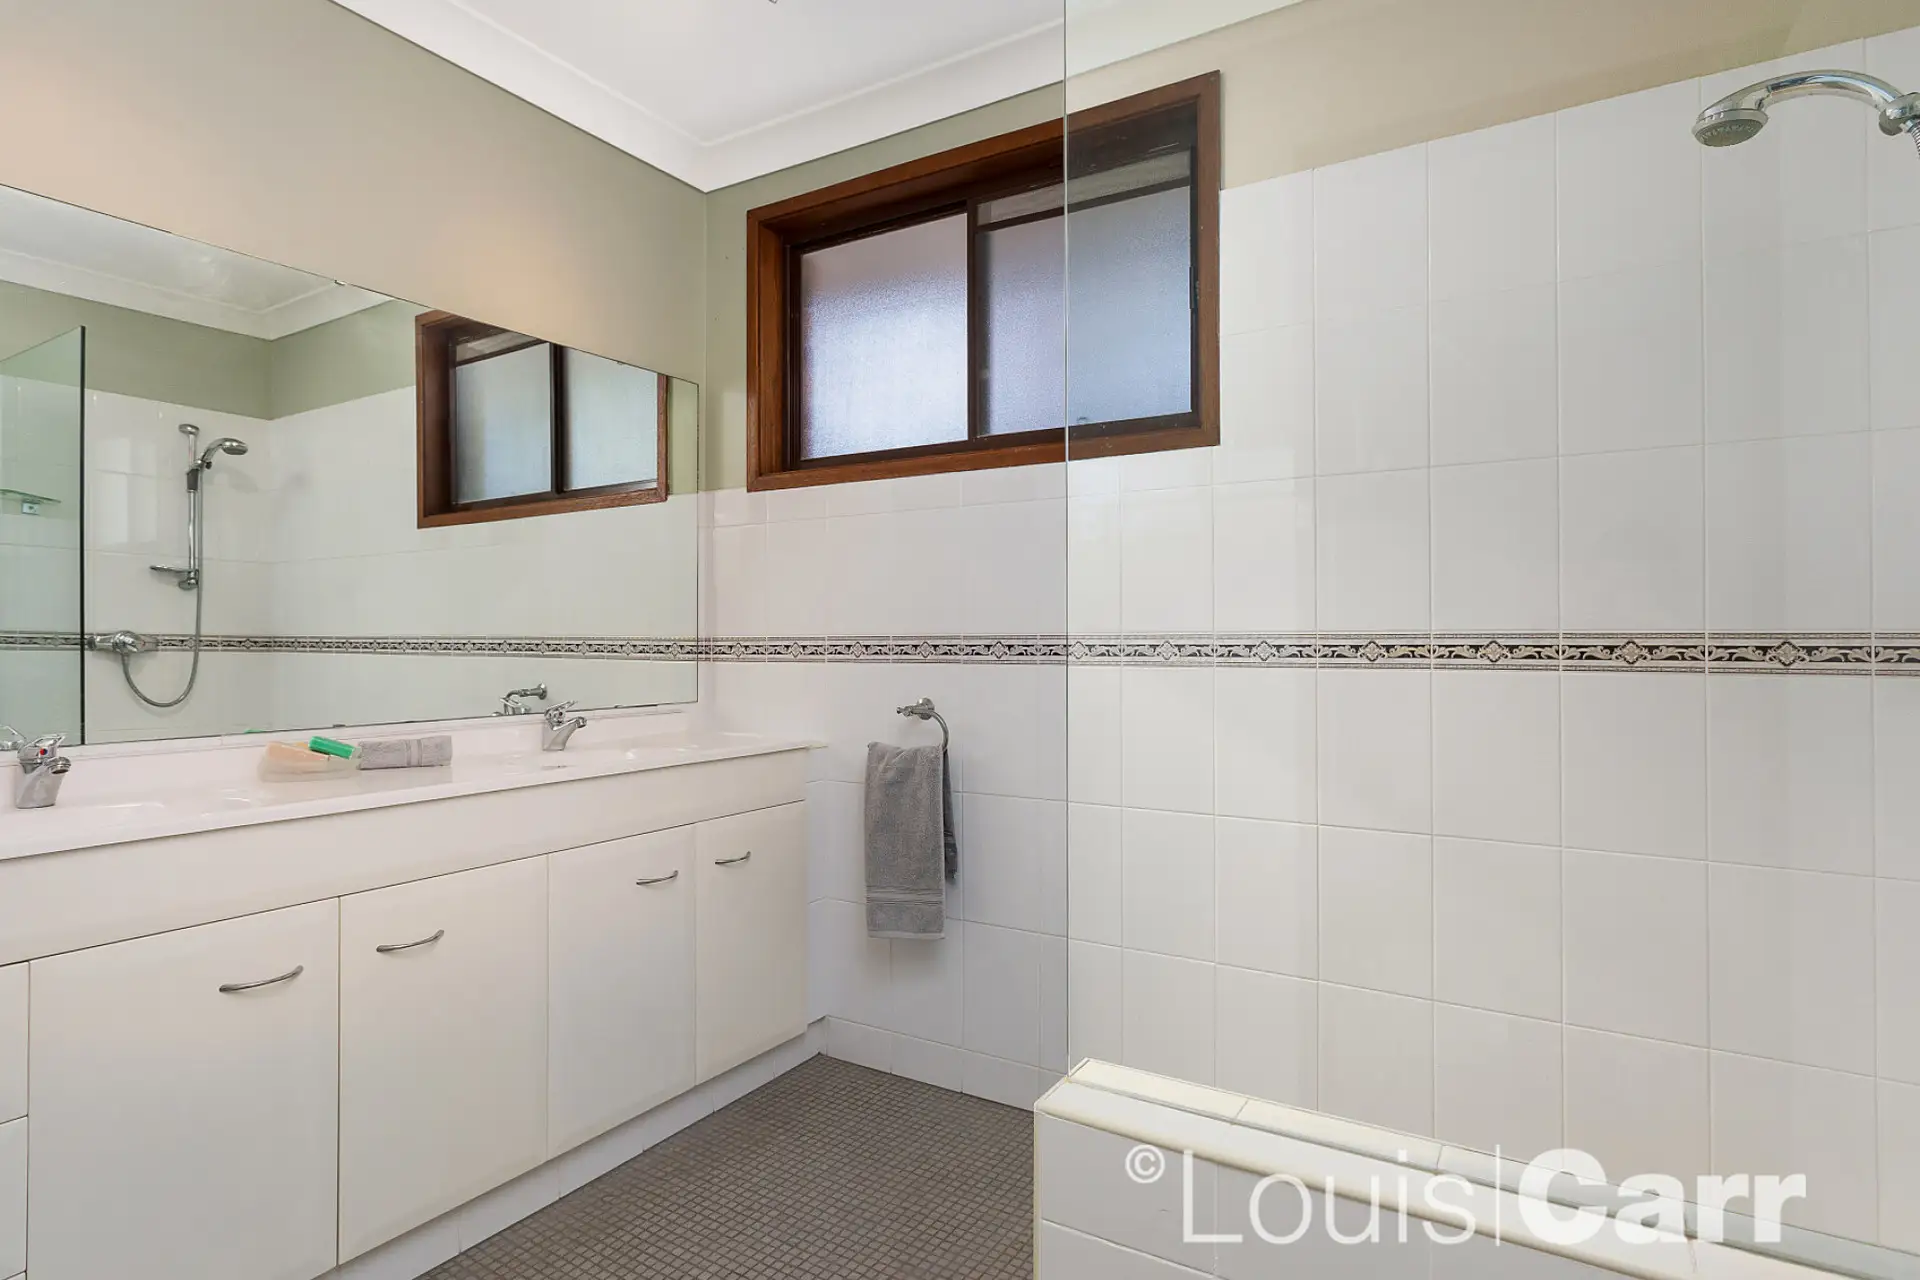 Photo #7: 11 Goodman Place, Cherrybrook - Sold by Louis Carr Real Estate